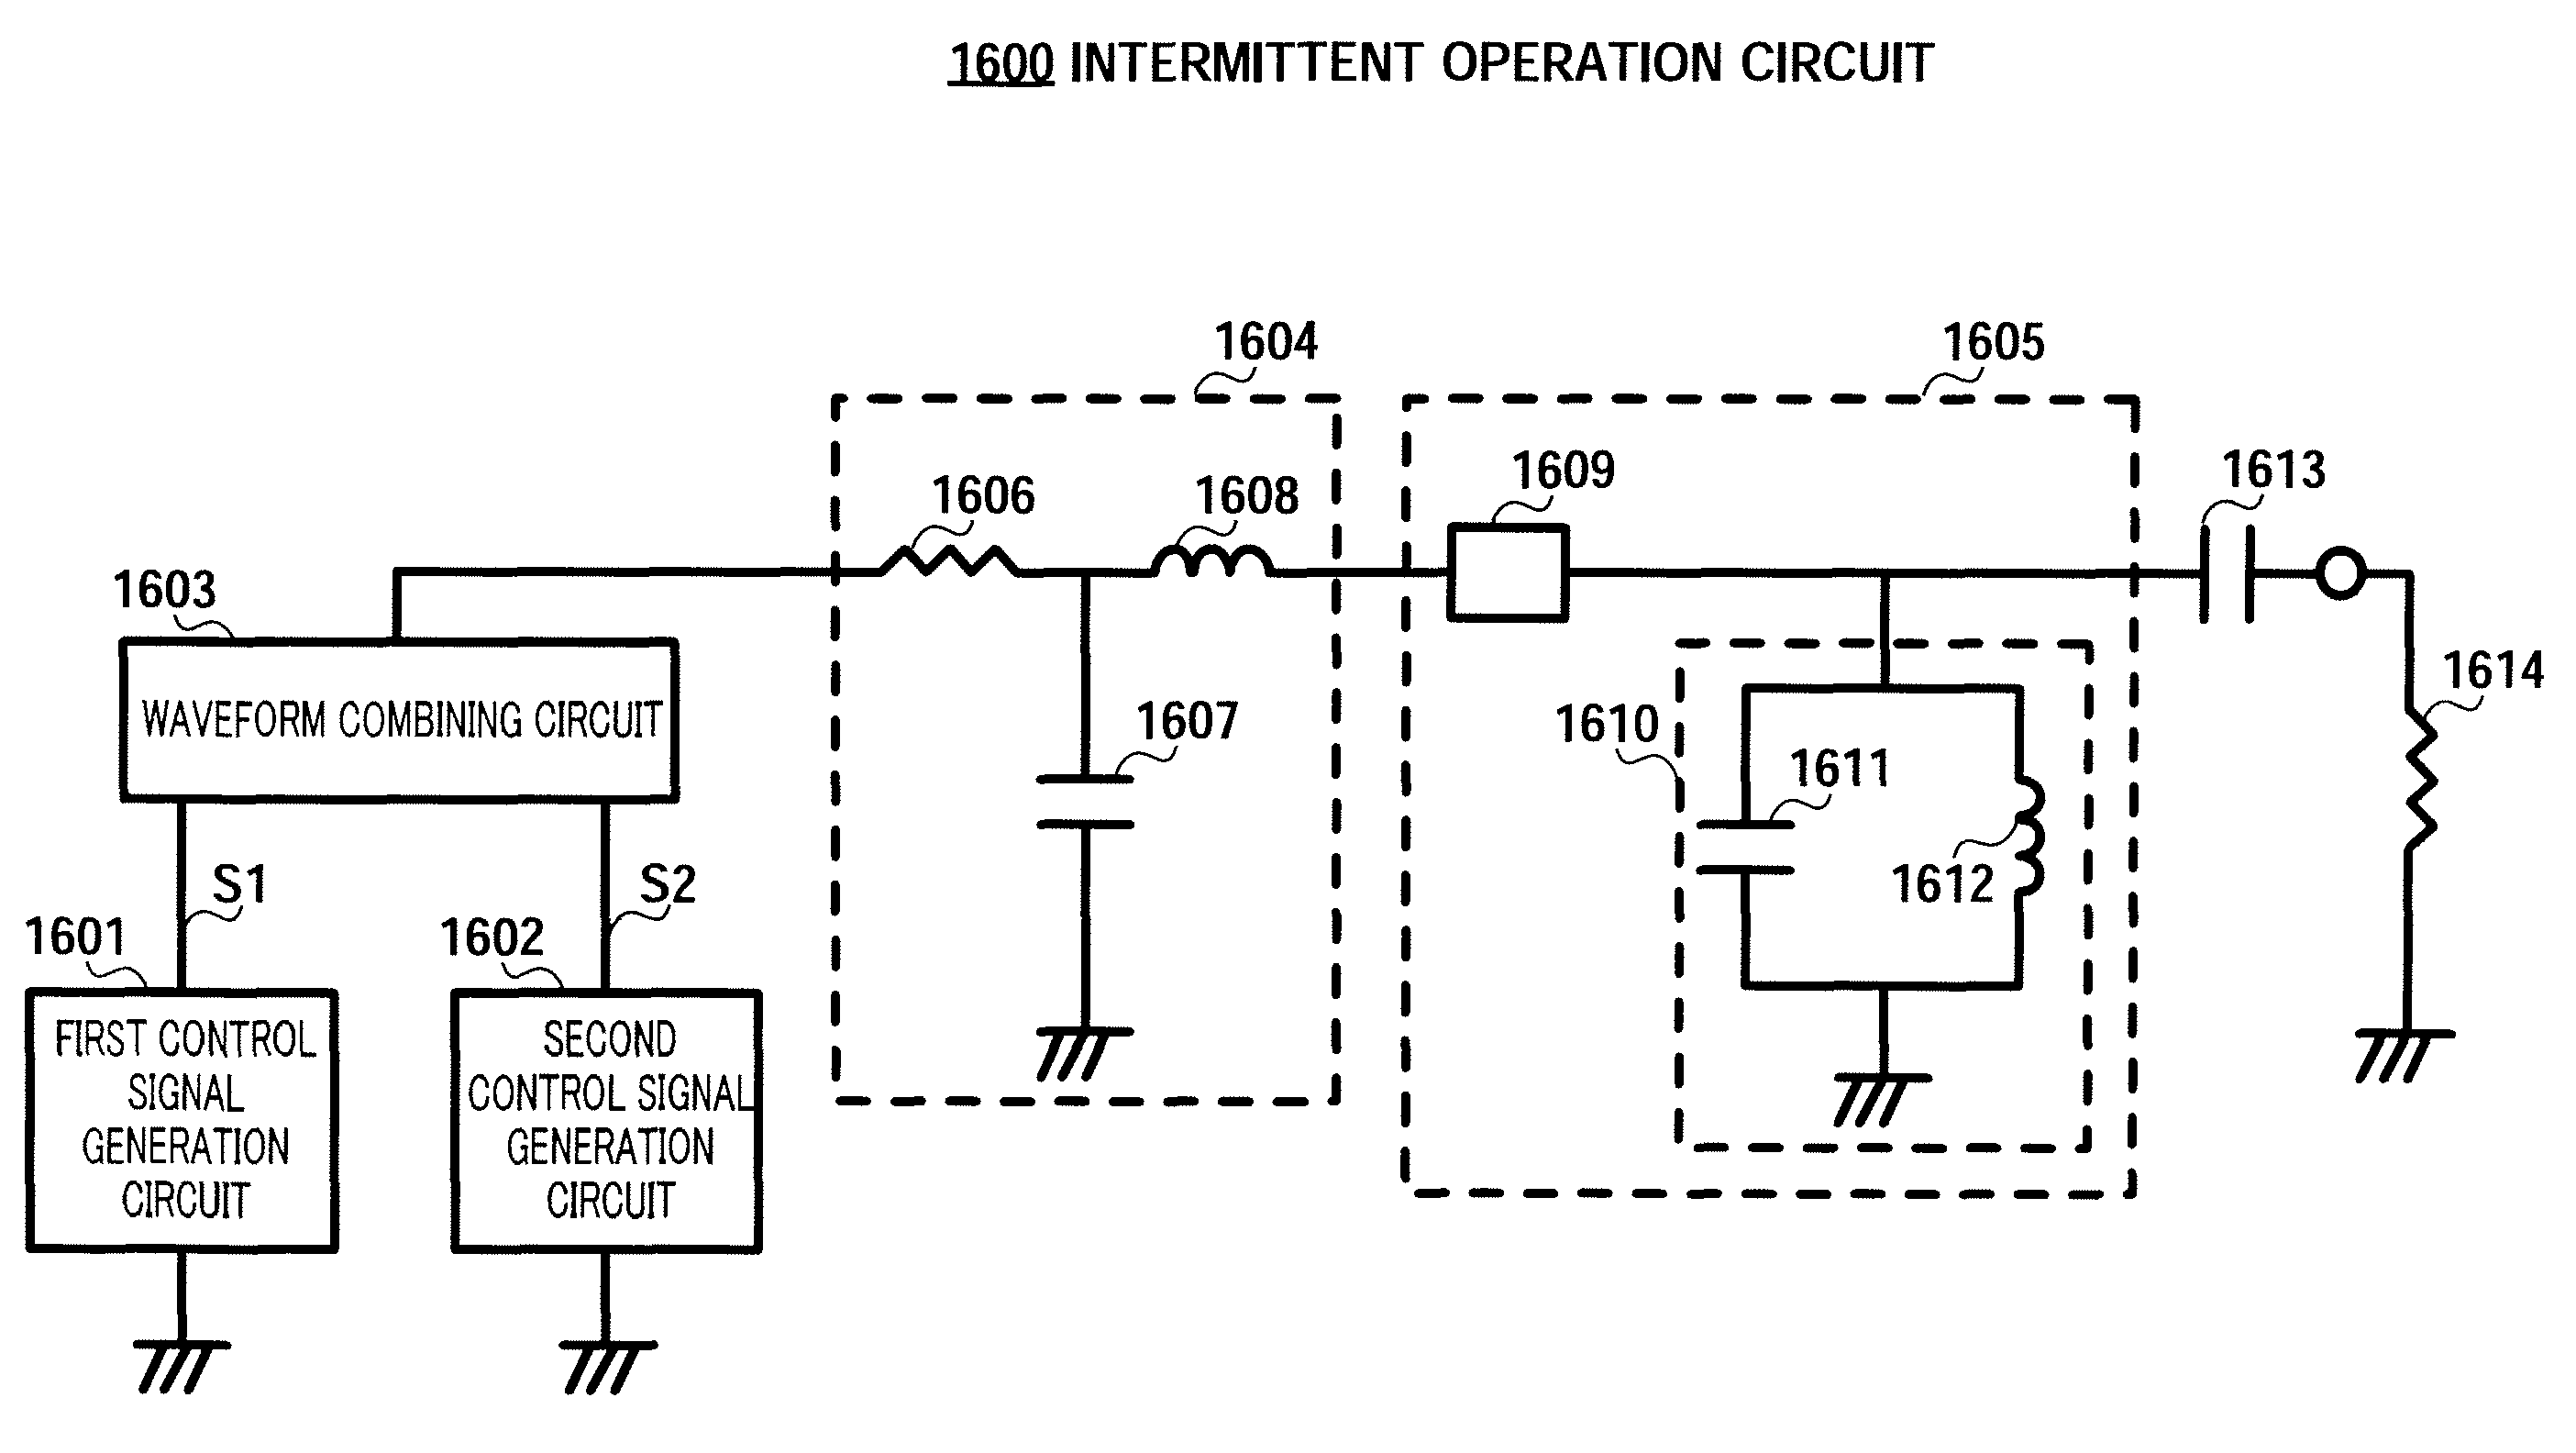 Intermittent operation circuit and modulation device